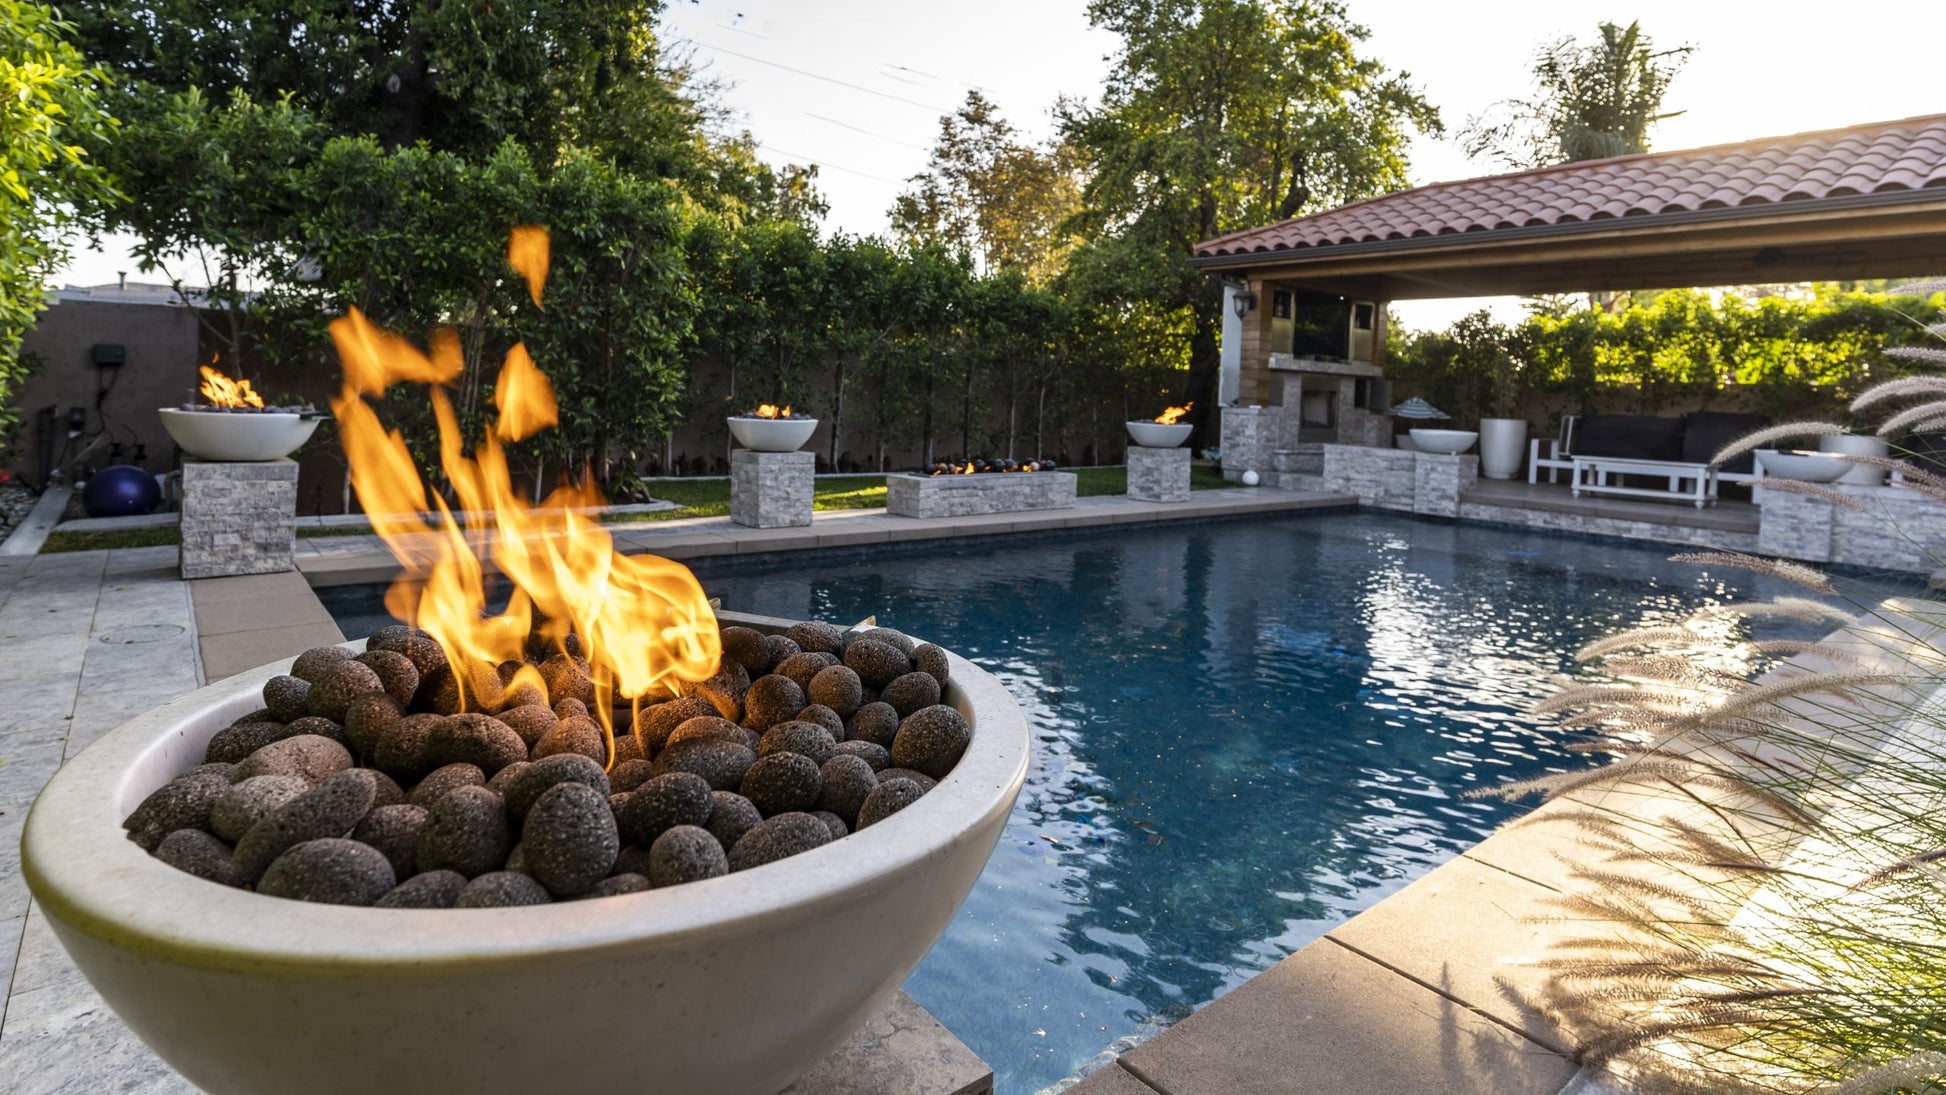 The Outdoor Plus Round Luna 30" Chestnut GFRC Concrete Natural Gas Fire Bowl with Match Lit with Flame Sense Ignition